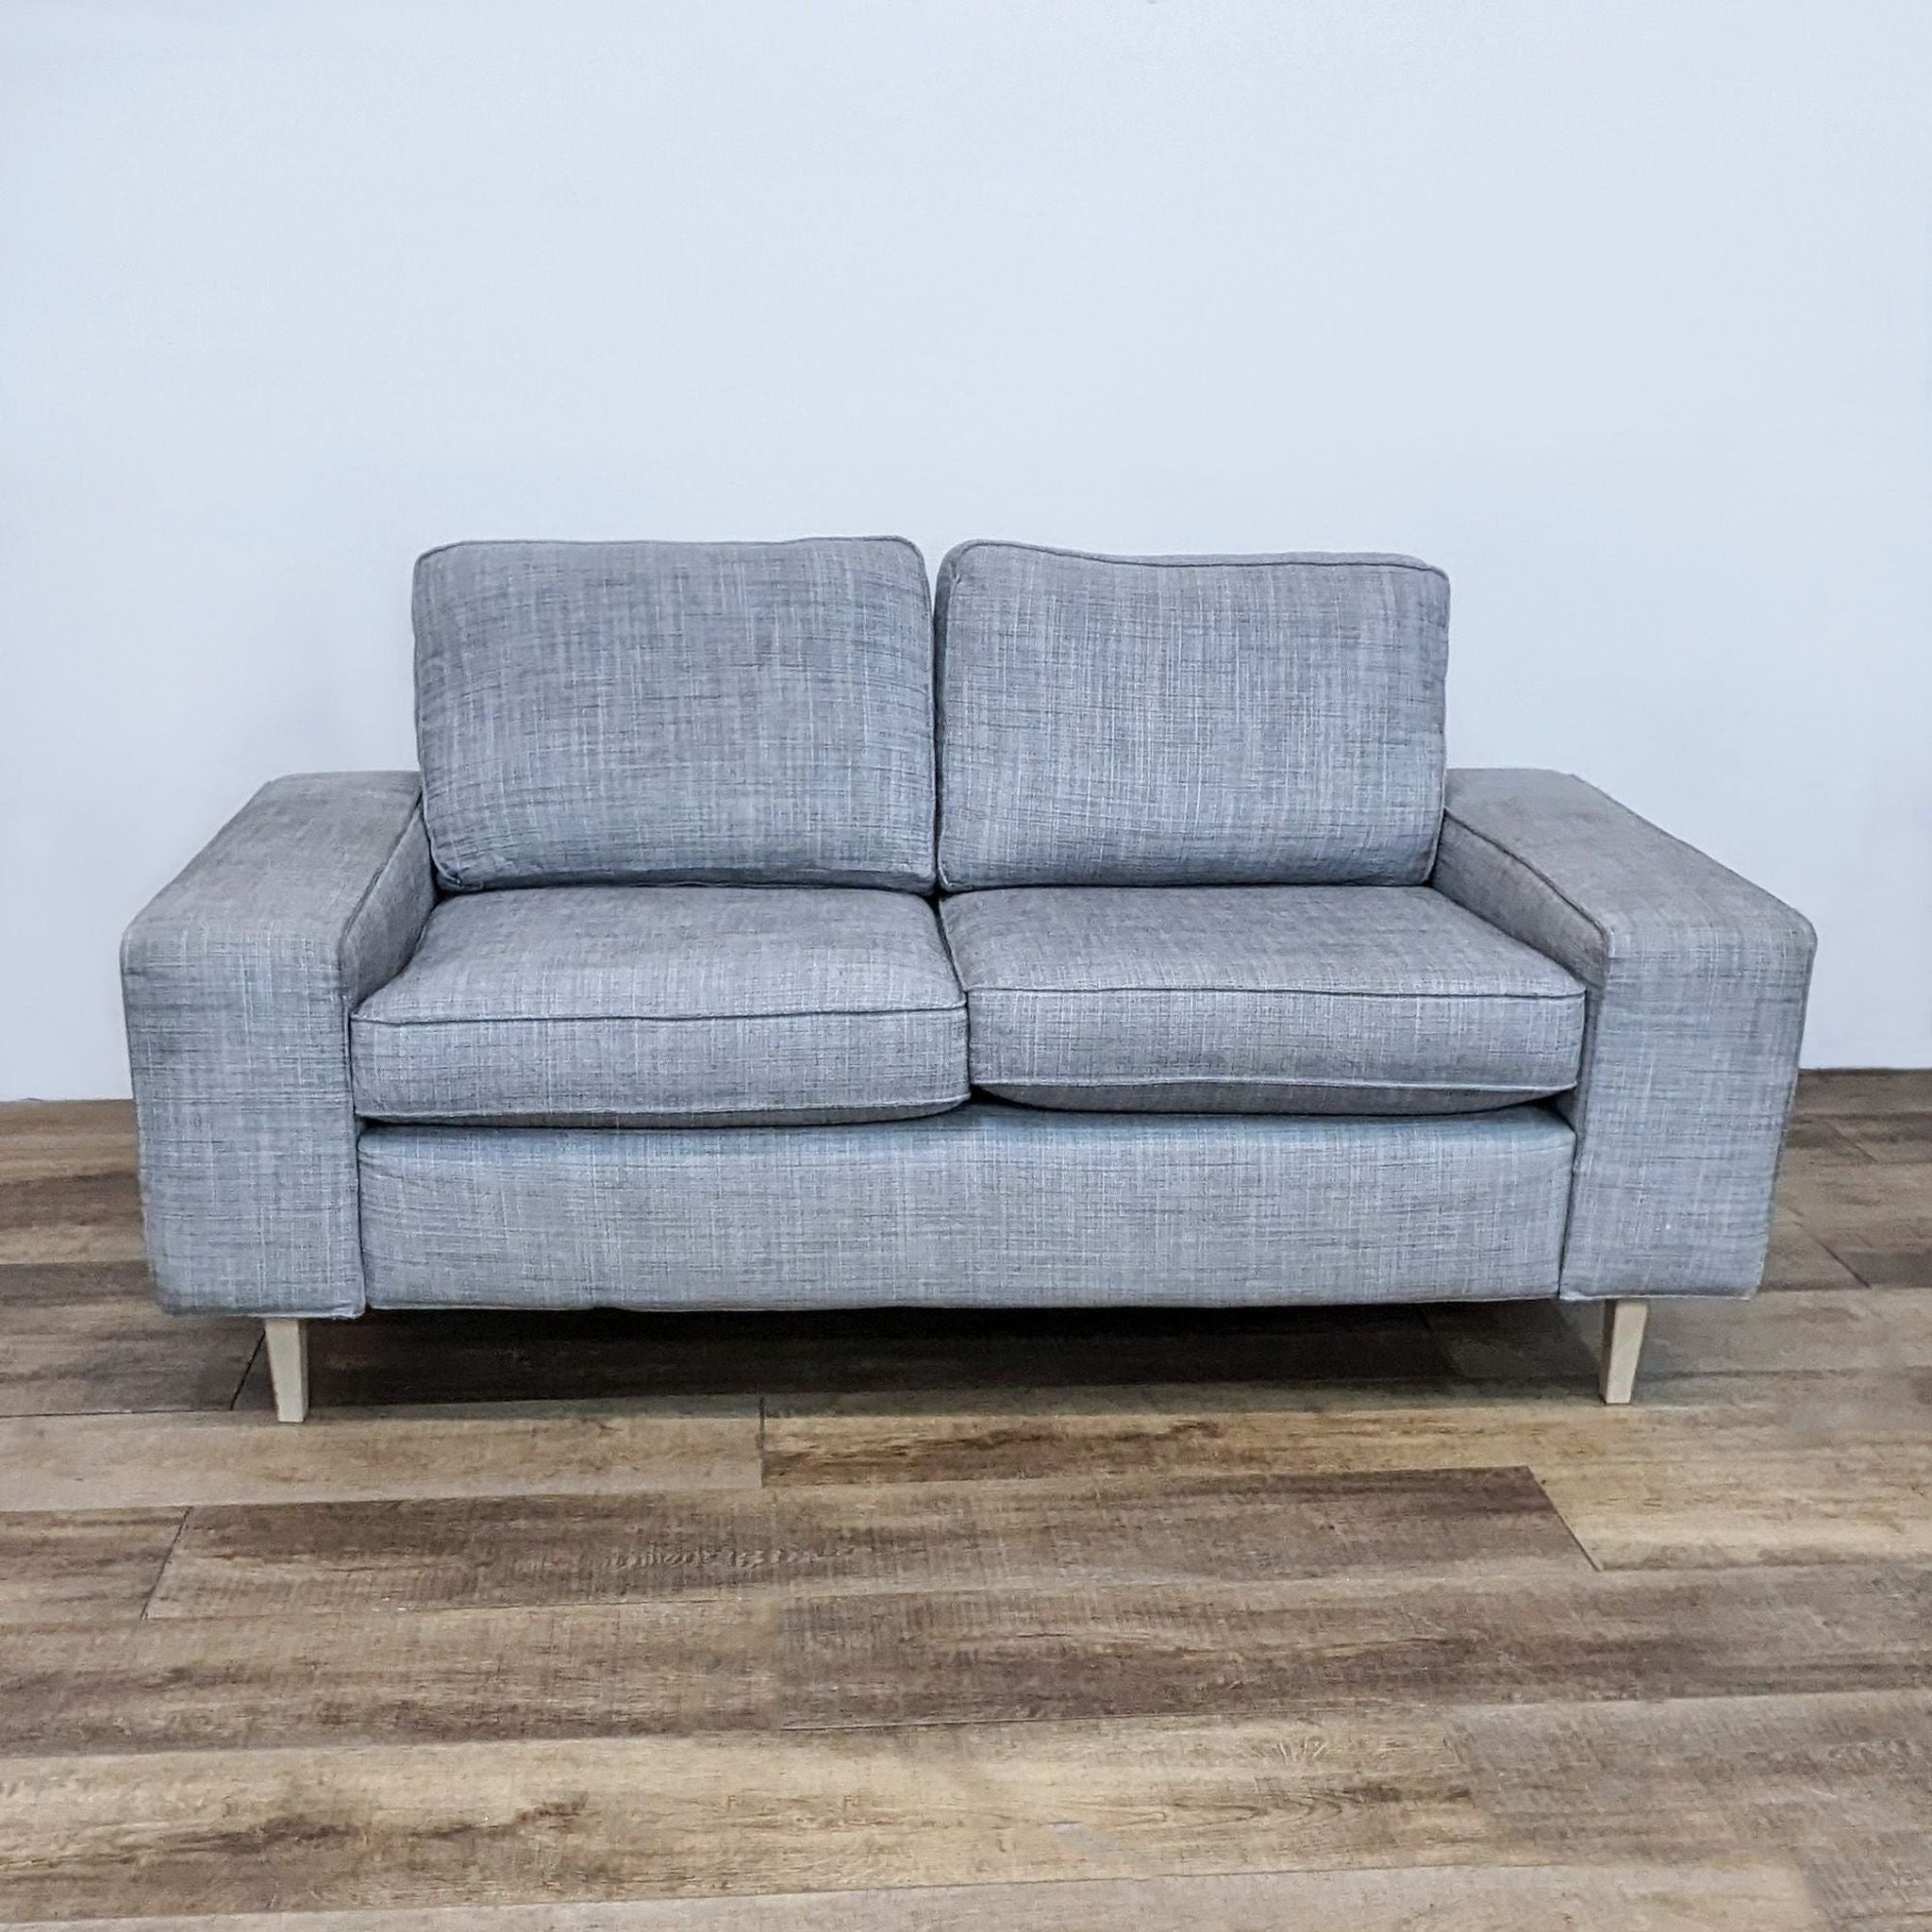 Alt text 1: IKEA 3-seat compact sofa with square arms and light finish feet, upholstered in a gray textured fabric.